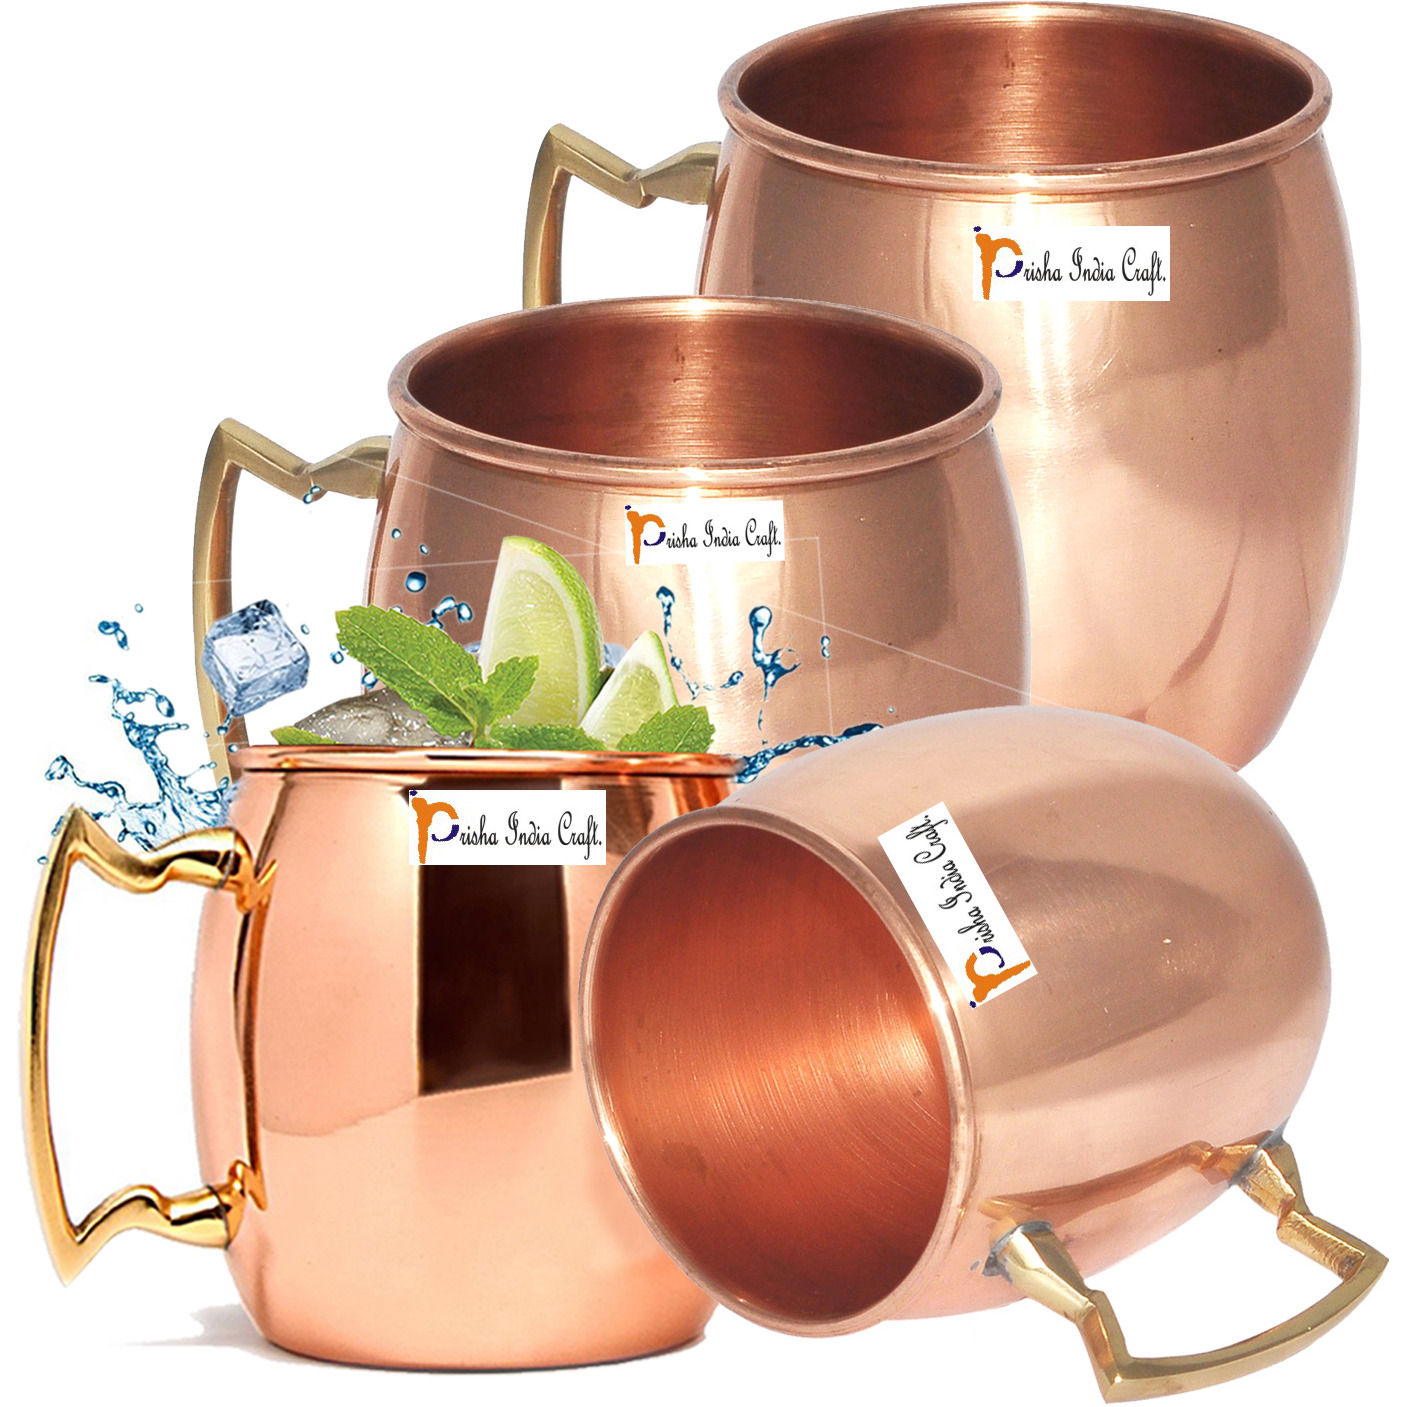 Set of 4 - Prisha India Craft B. Solid Copper Mug for Moscow Mules 550 ML / 18 oz 100% Pure Copper FREE 4 SHOT MUG 2 - OUNCE, Moscow Mule Cocktail Cup, Copper Mugs, Cocktail Mugs